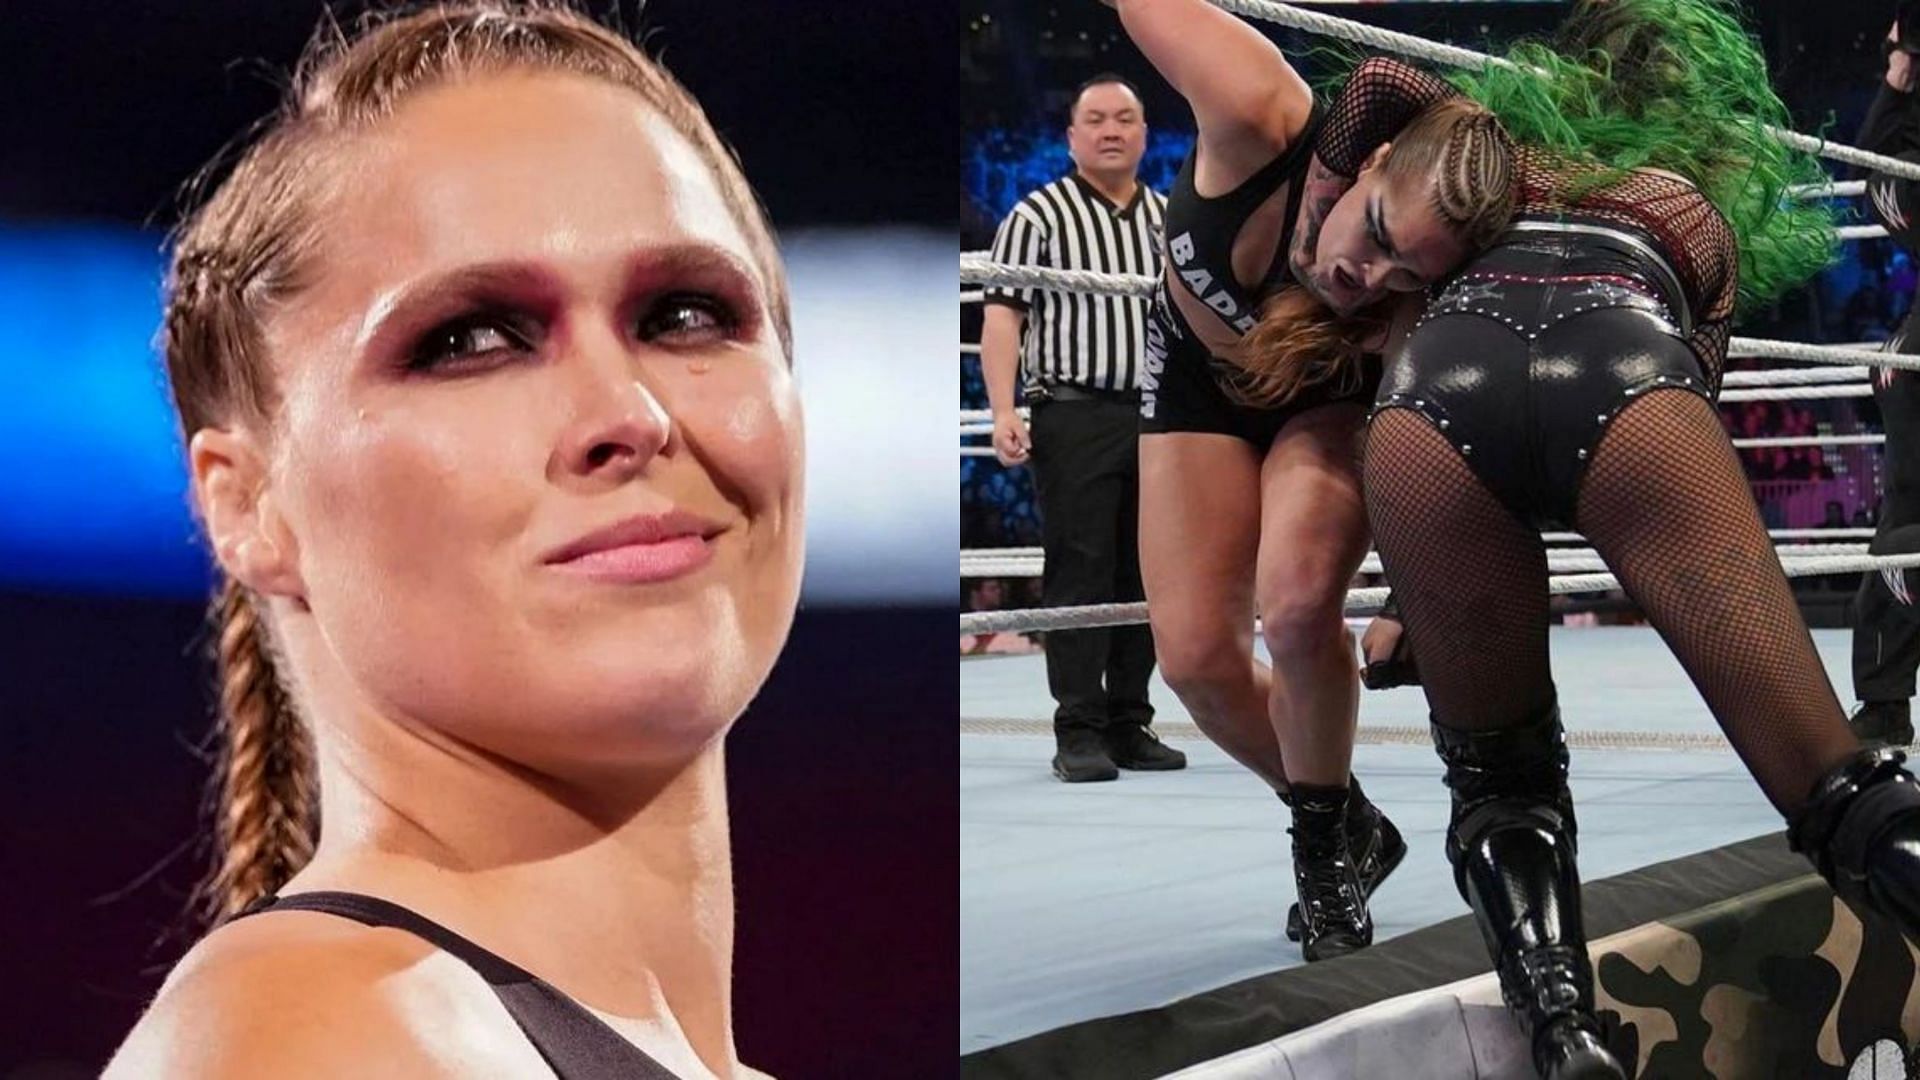 Ronda Rousey and Shotzi went head-to-head at WWE Survivor Series: War Games